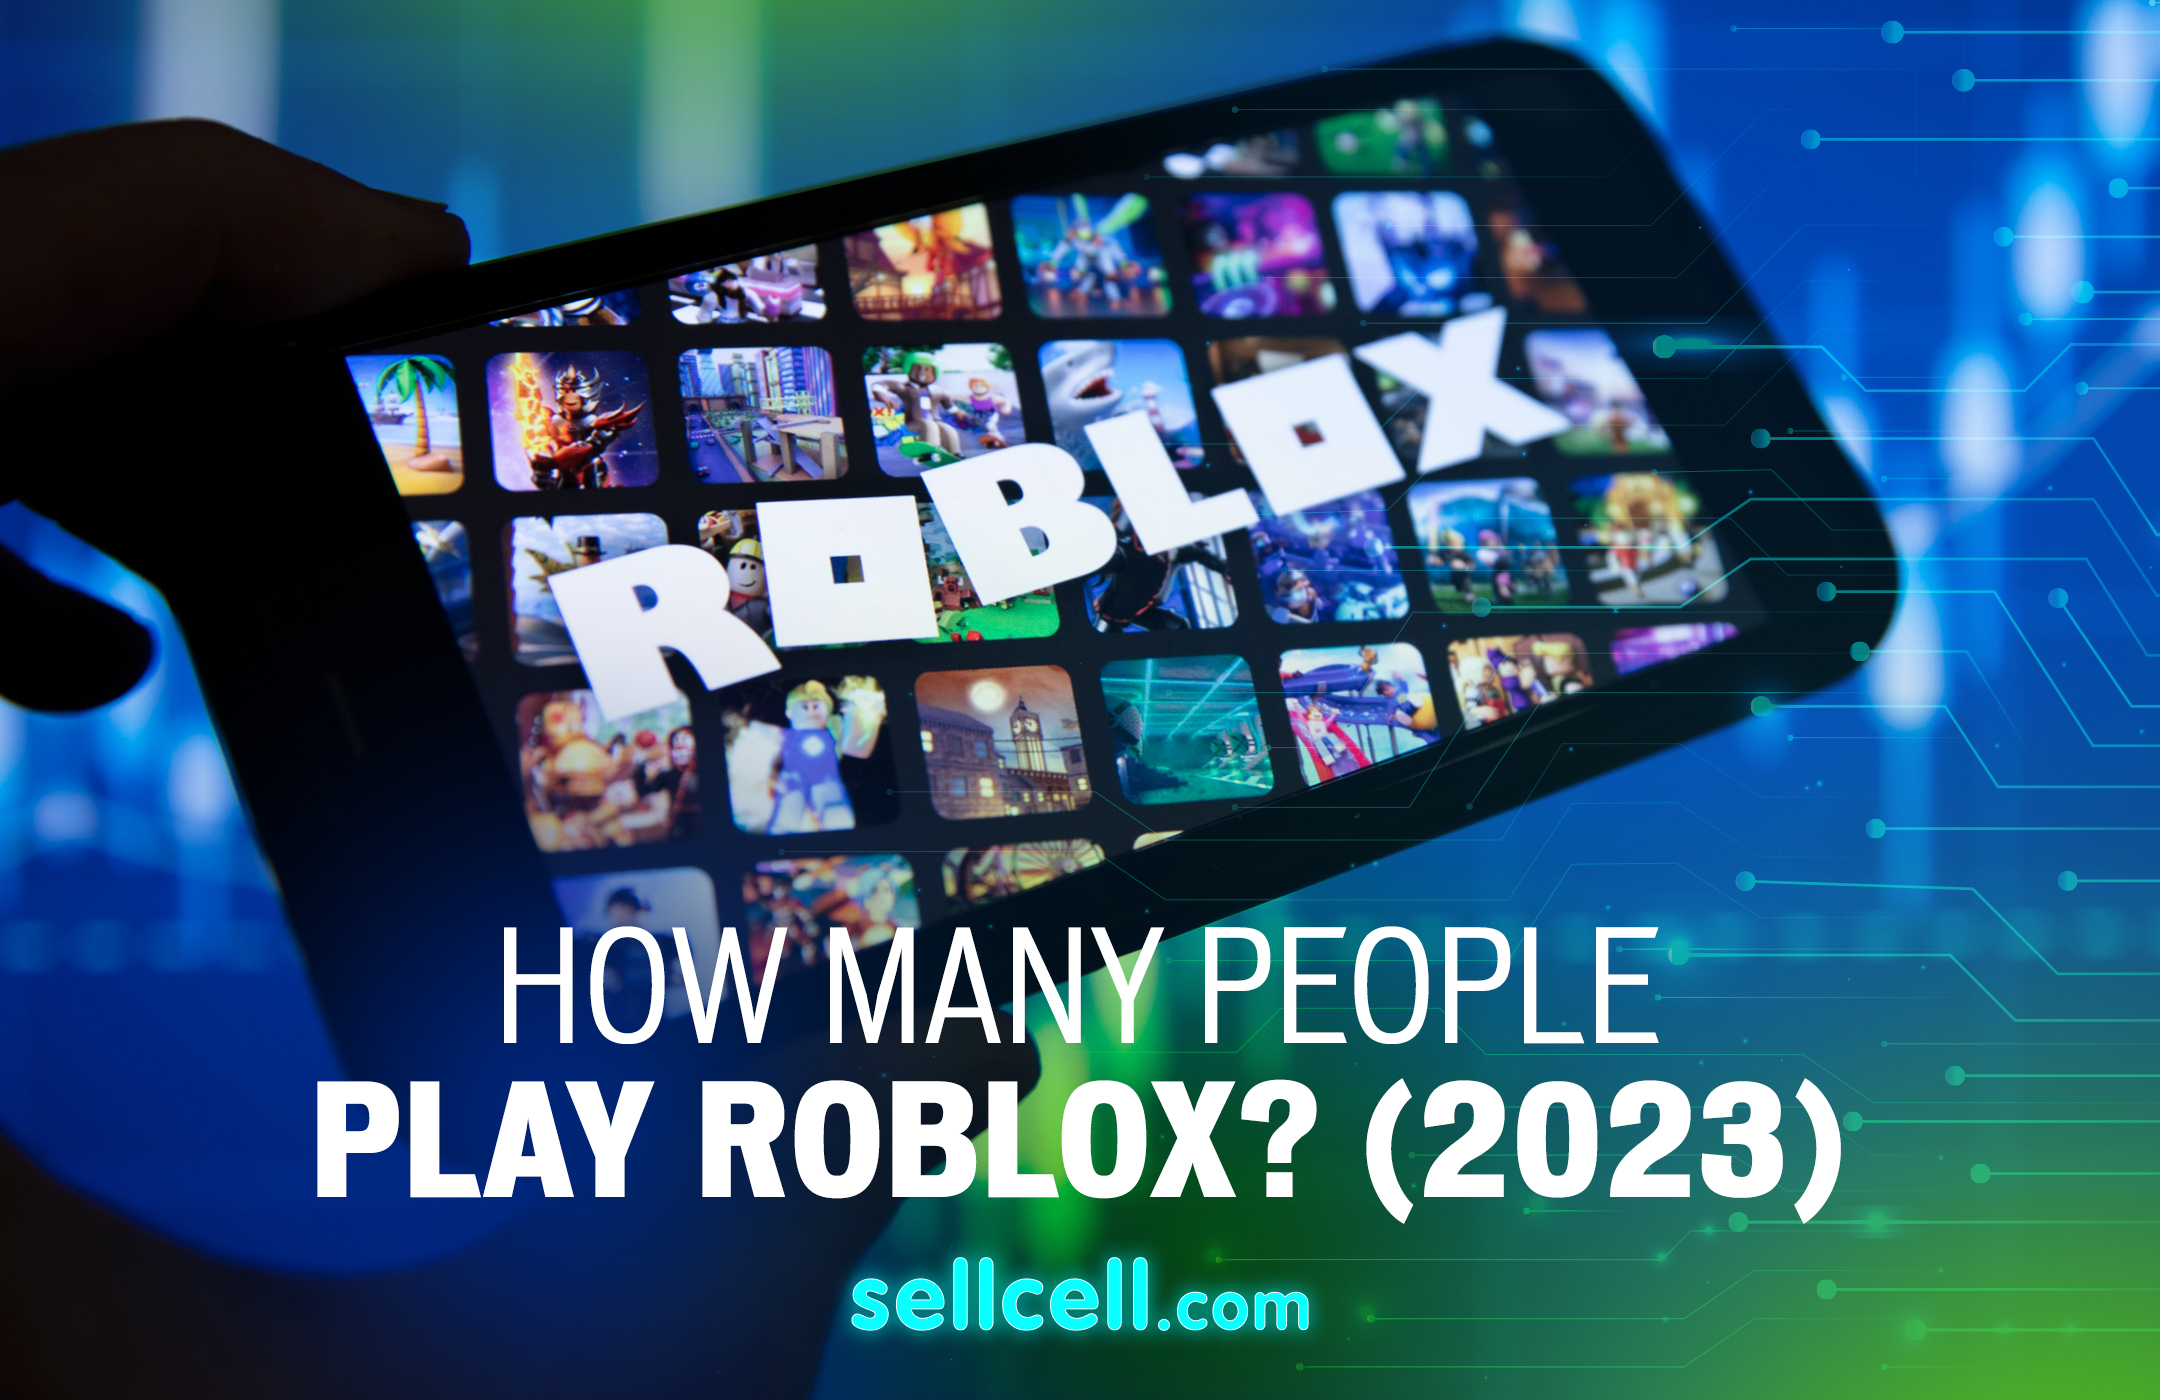 How Many People Play Roblox? Roblox Statistics (2023) Blog